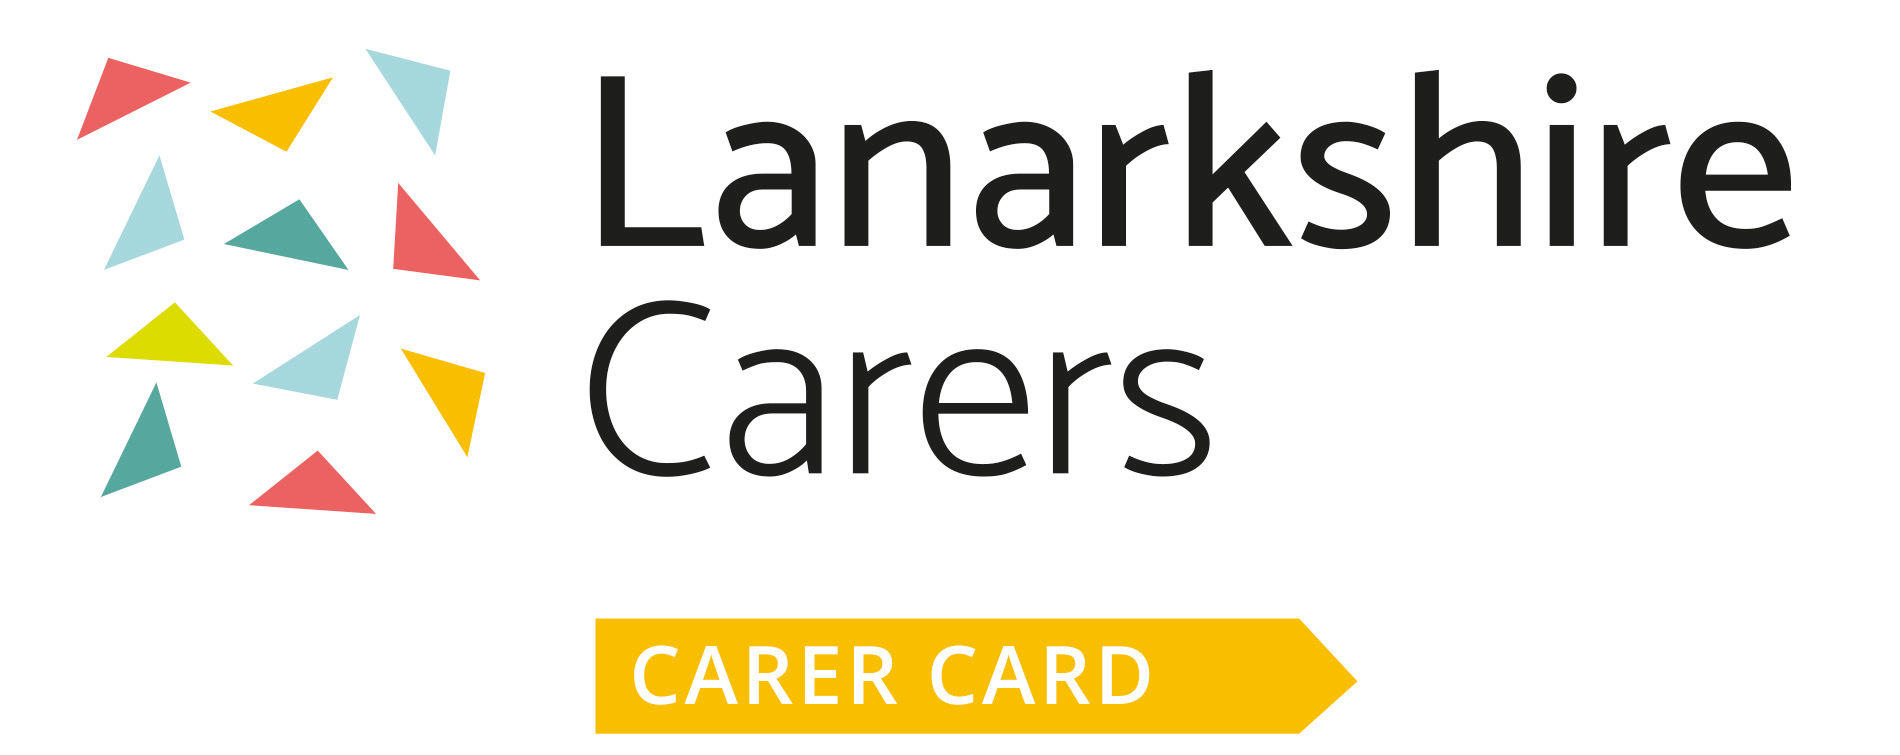 Carer Card Terms and Conditions